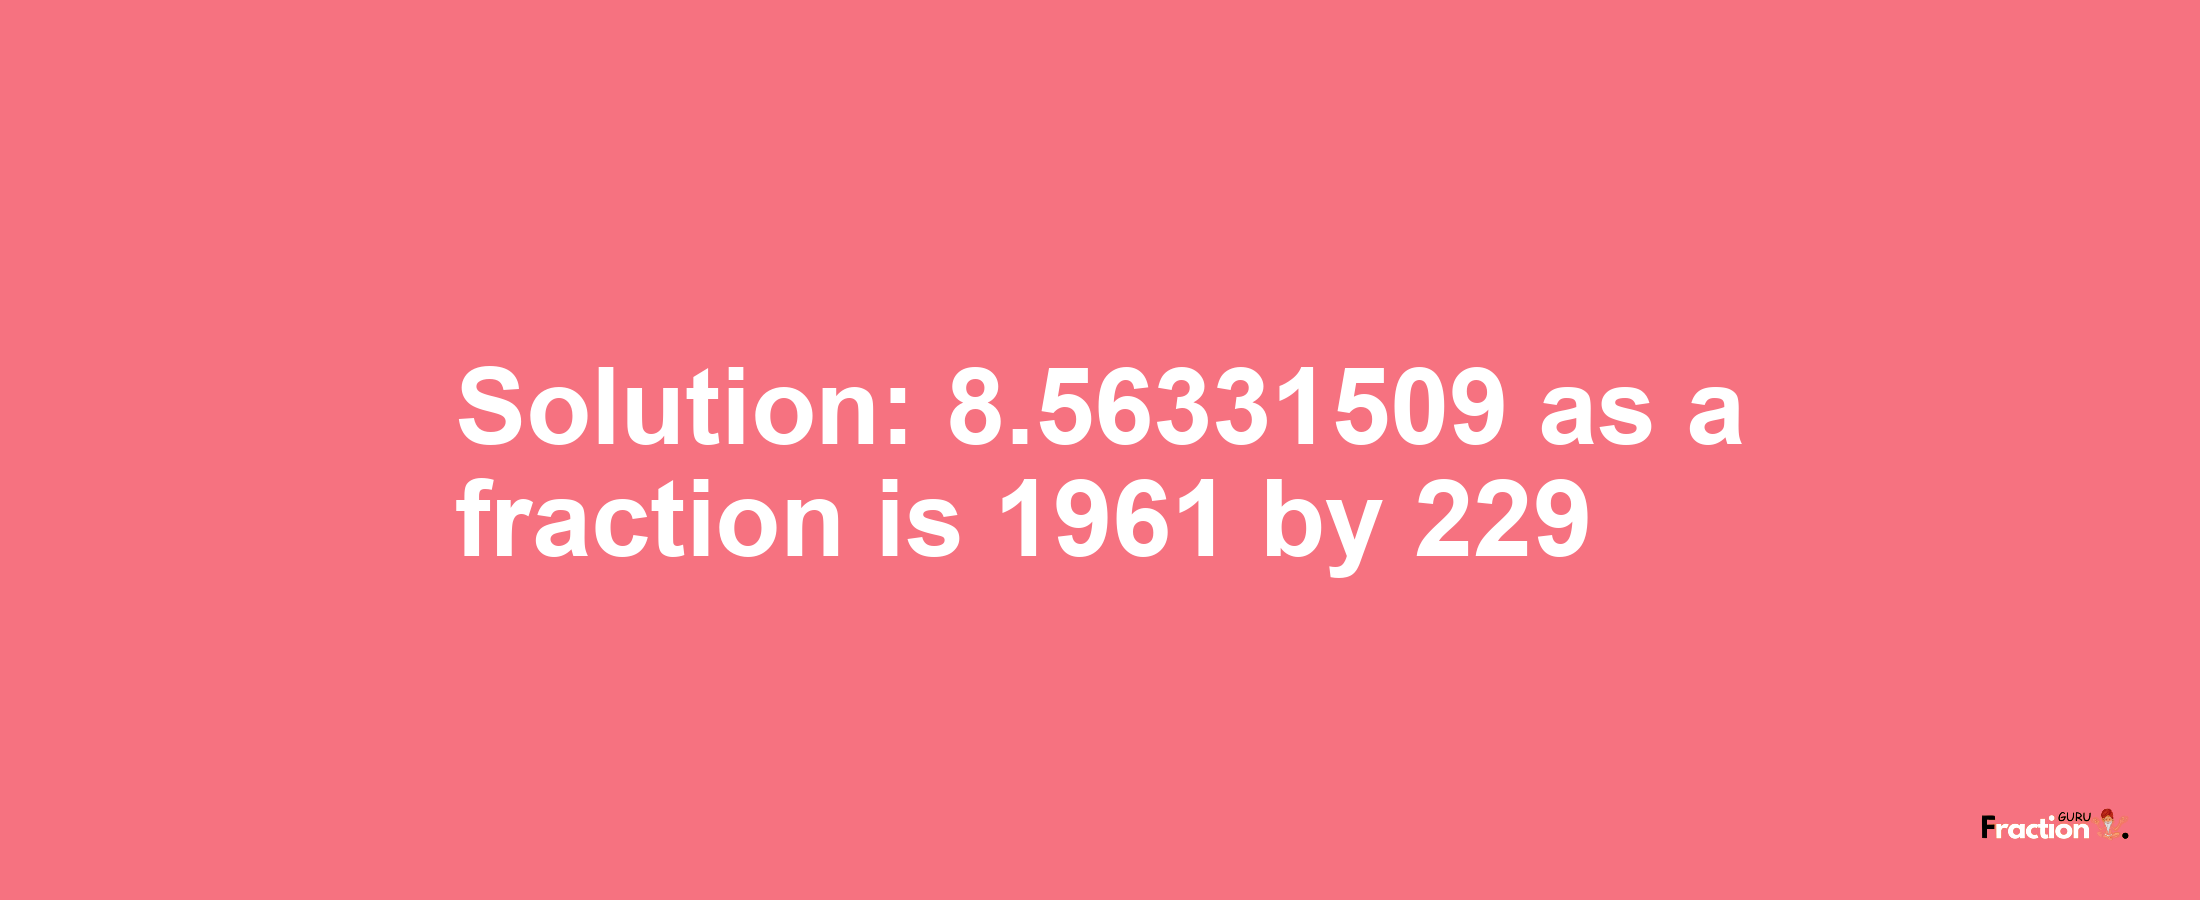 Solution:8.56331509 as a fraction is 1961/229